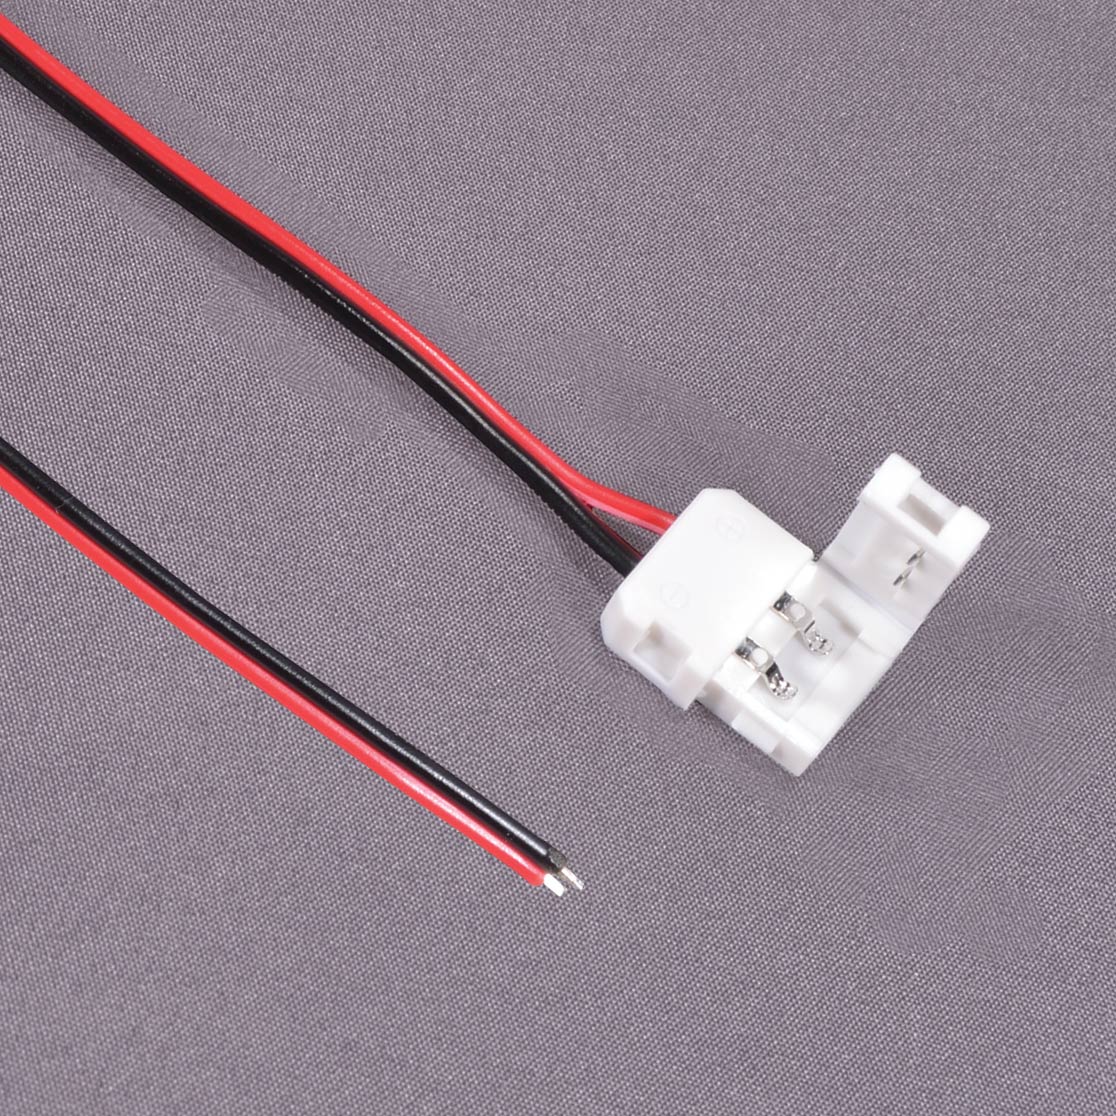 LED Strip Connector with 5 inch long flying leads